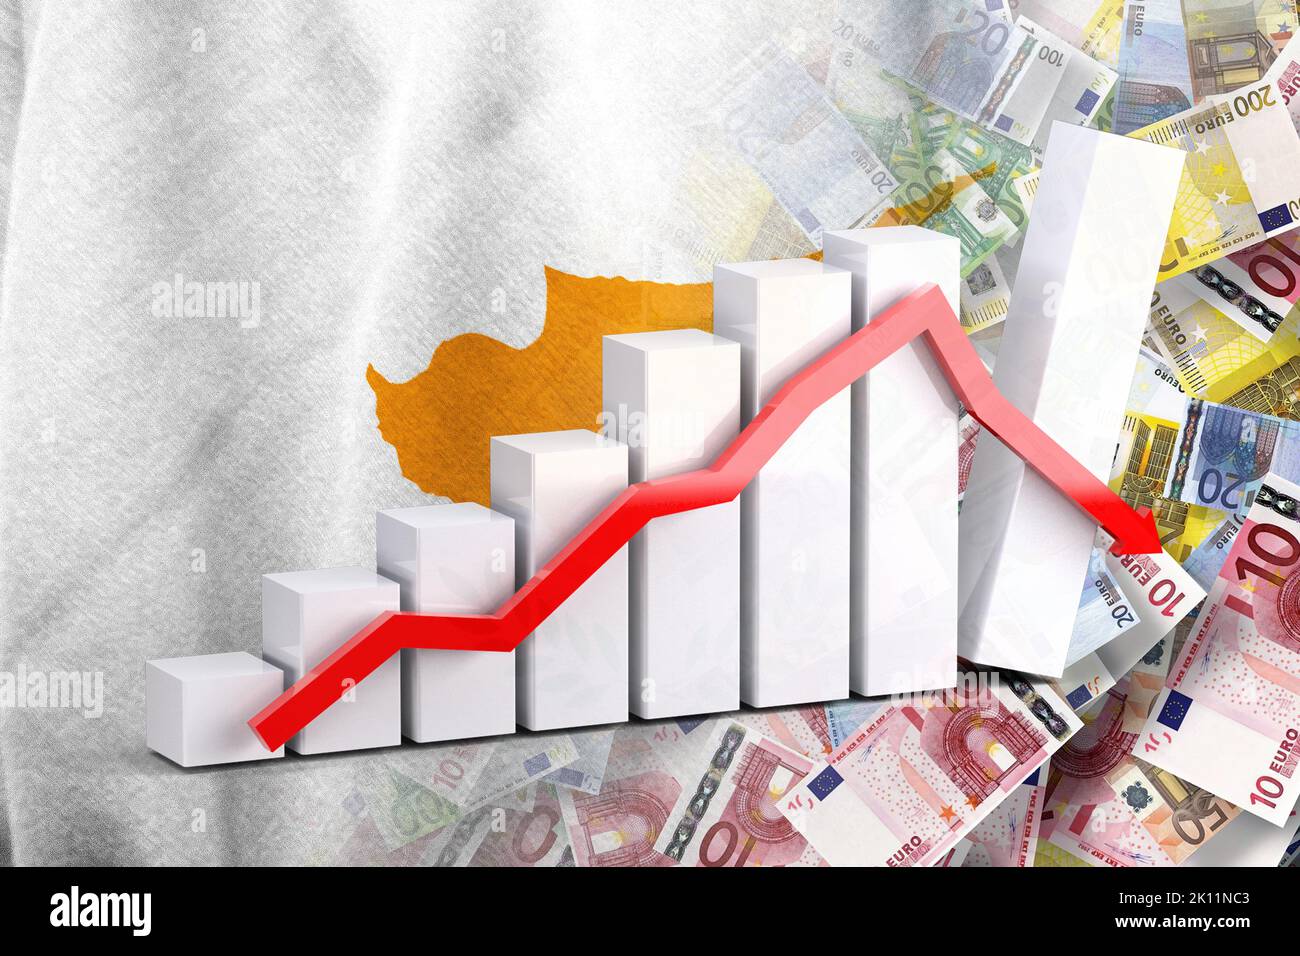 Economy Graph: Downward Arrow, Euro Cash Banknotes and Cyprus Flag (Money, Economy, Business, Finance, Crisis) Stock Photo